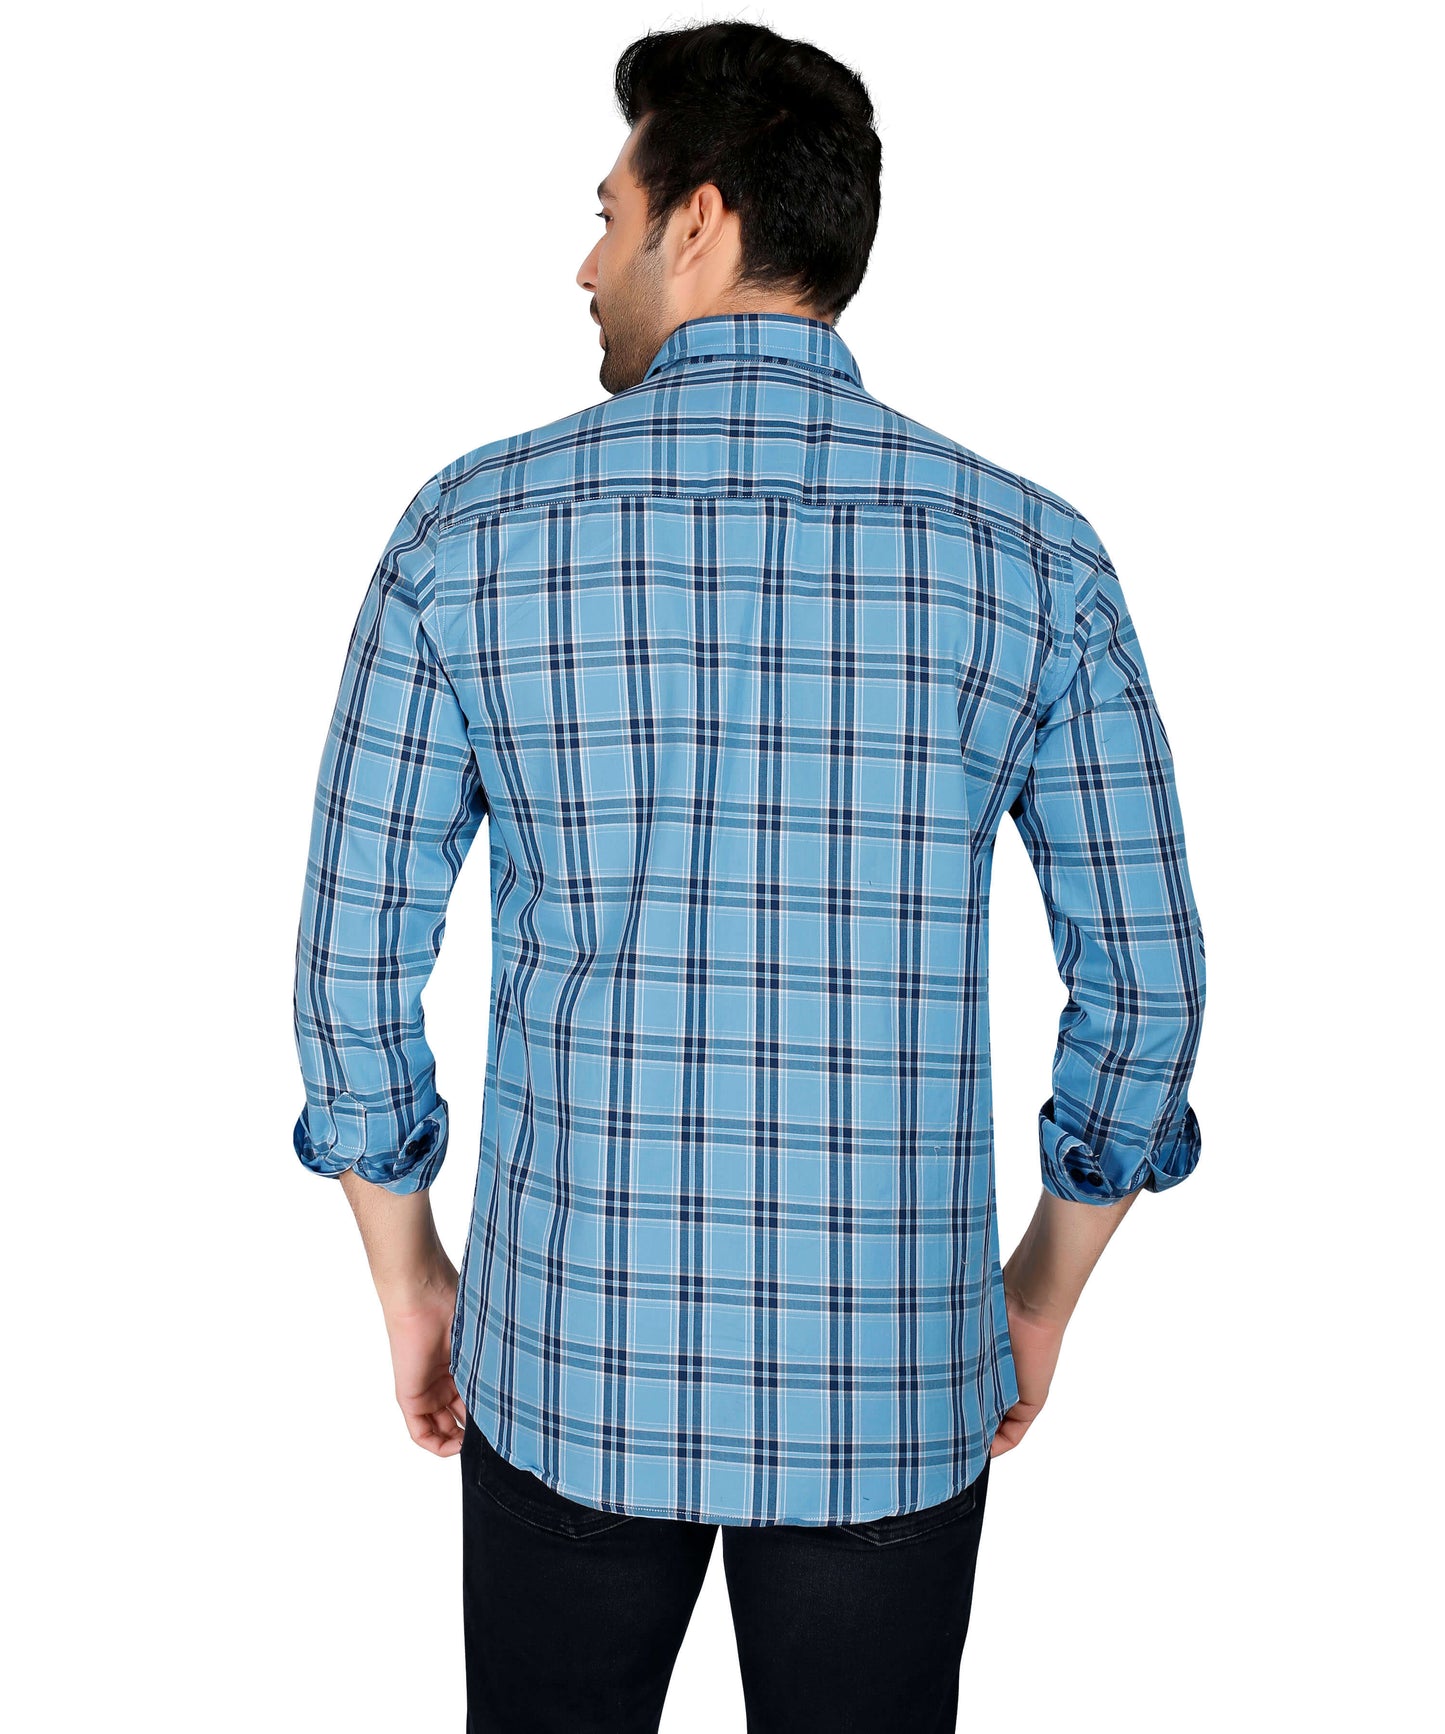 5thanfold Men's Casual Pure Cotton Full Sleeve Checkered Sky Blue Regular Fit Shirt